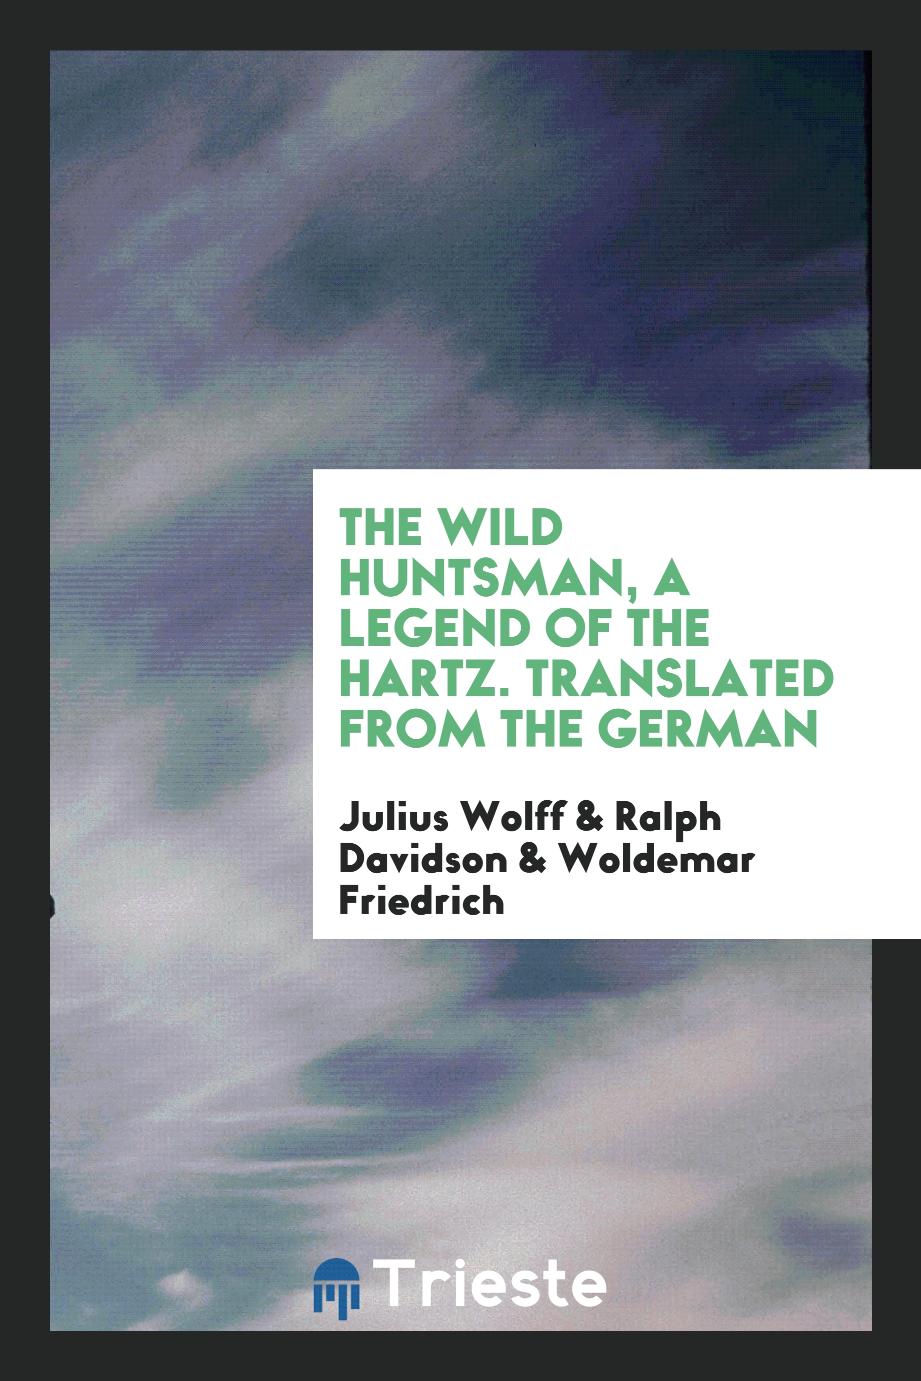 The Wild Huntsman, a Legend of the Hartz. Translated from the German